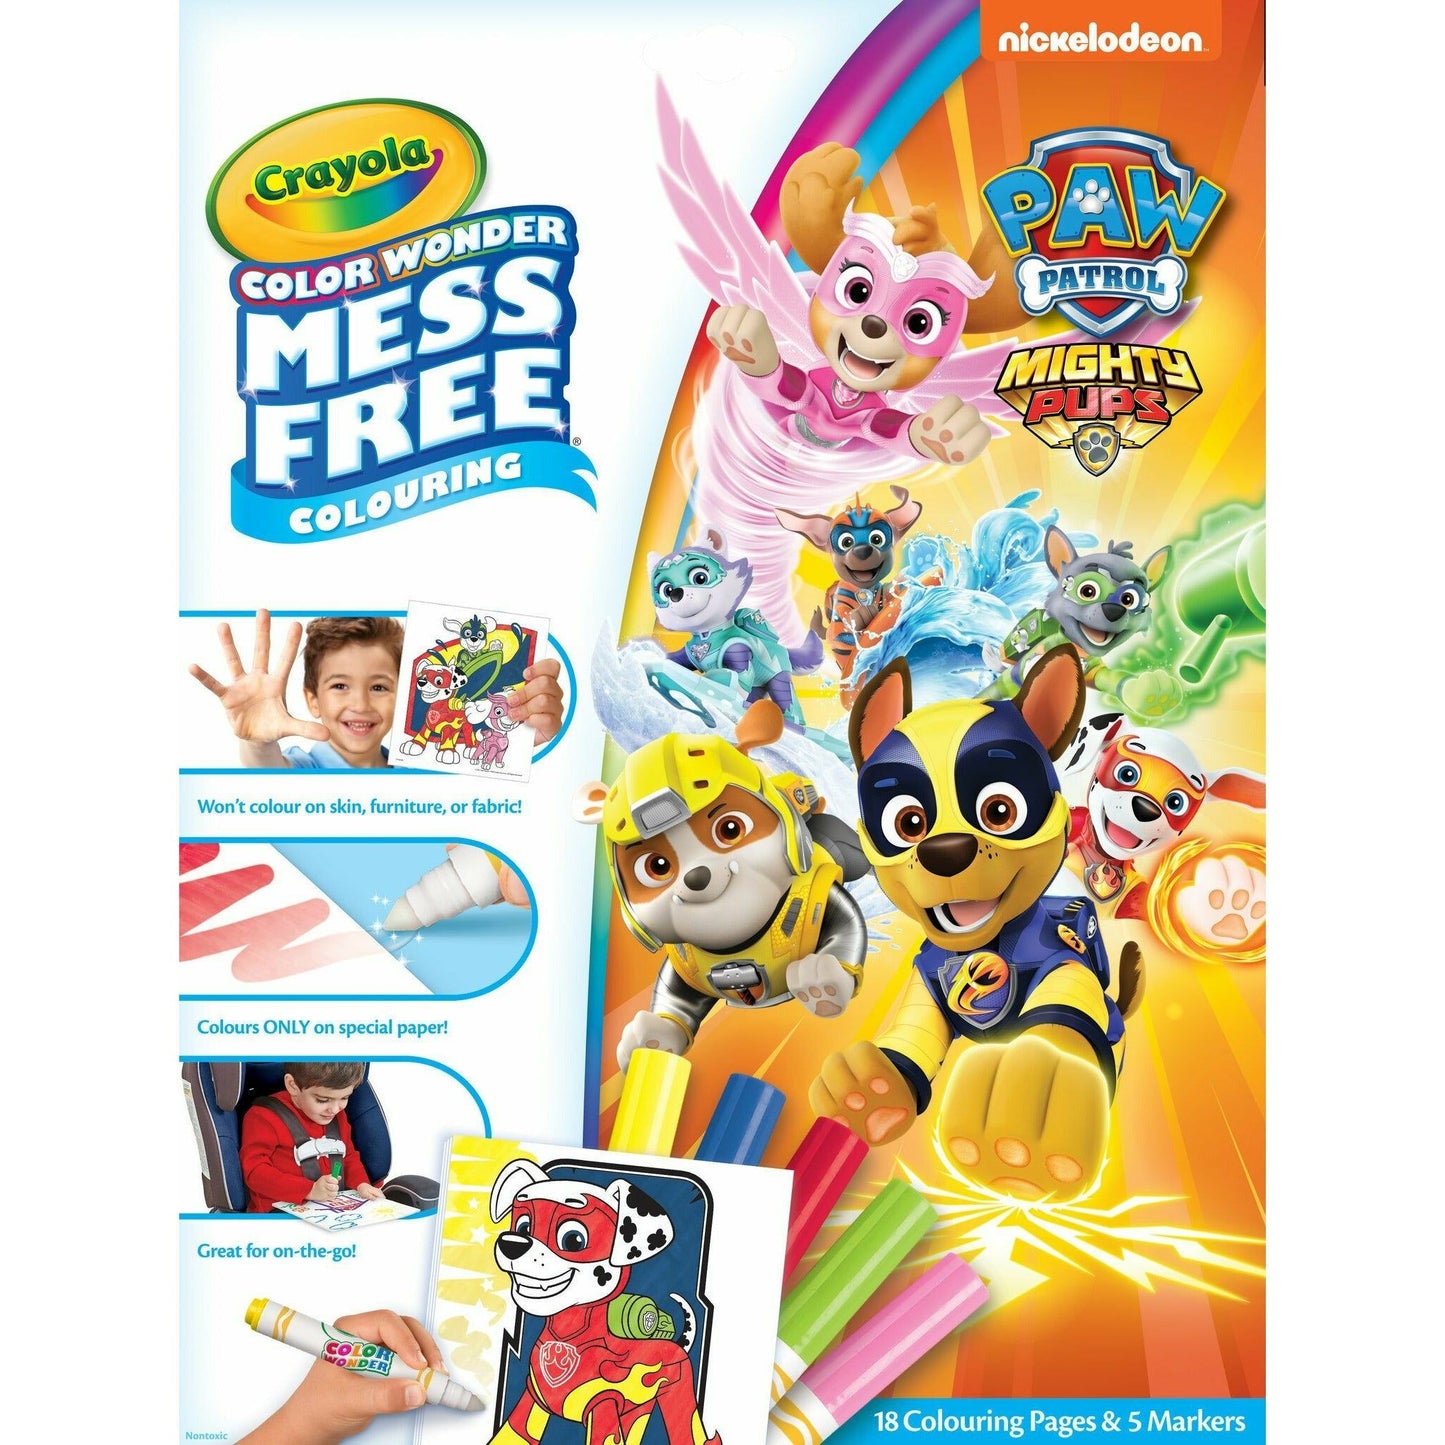 Crayola Colour Wonder Mess Free Colouring: Paw Patrol Mighty Pups